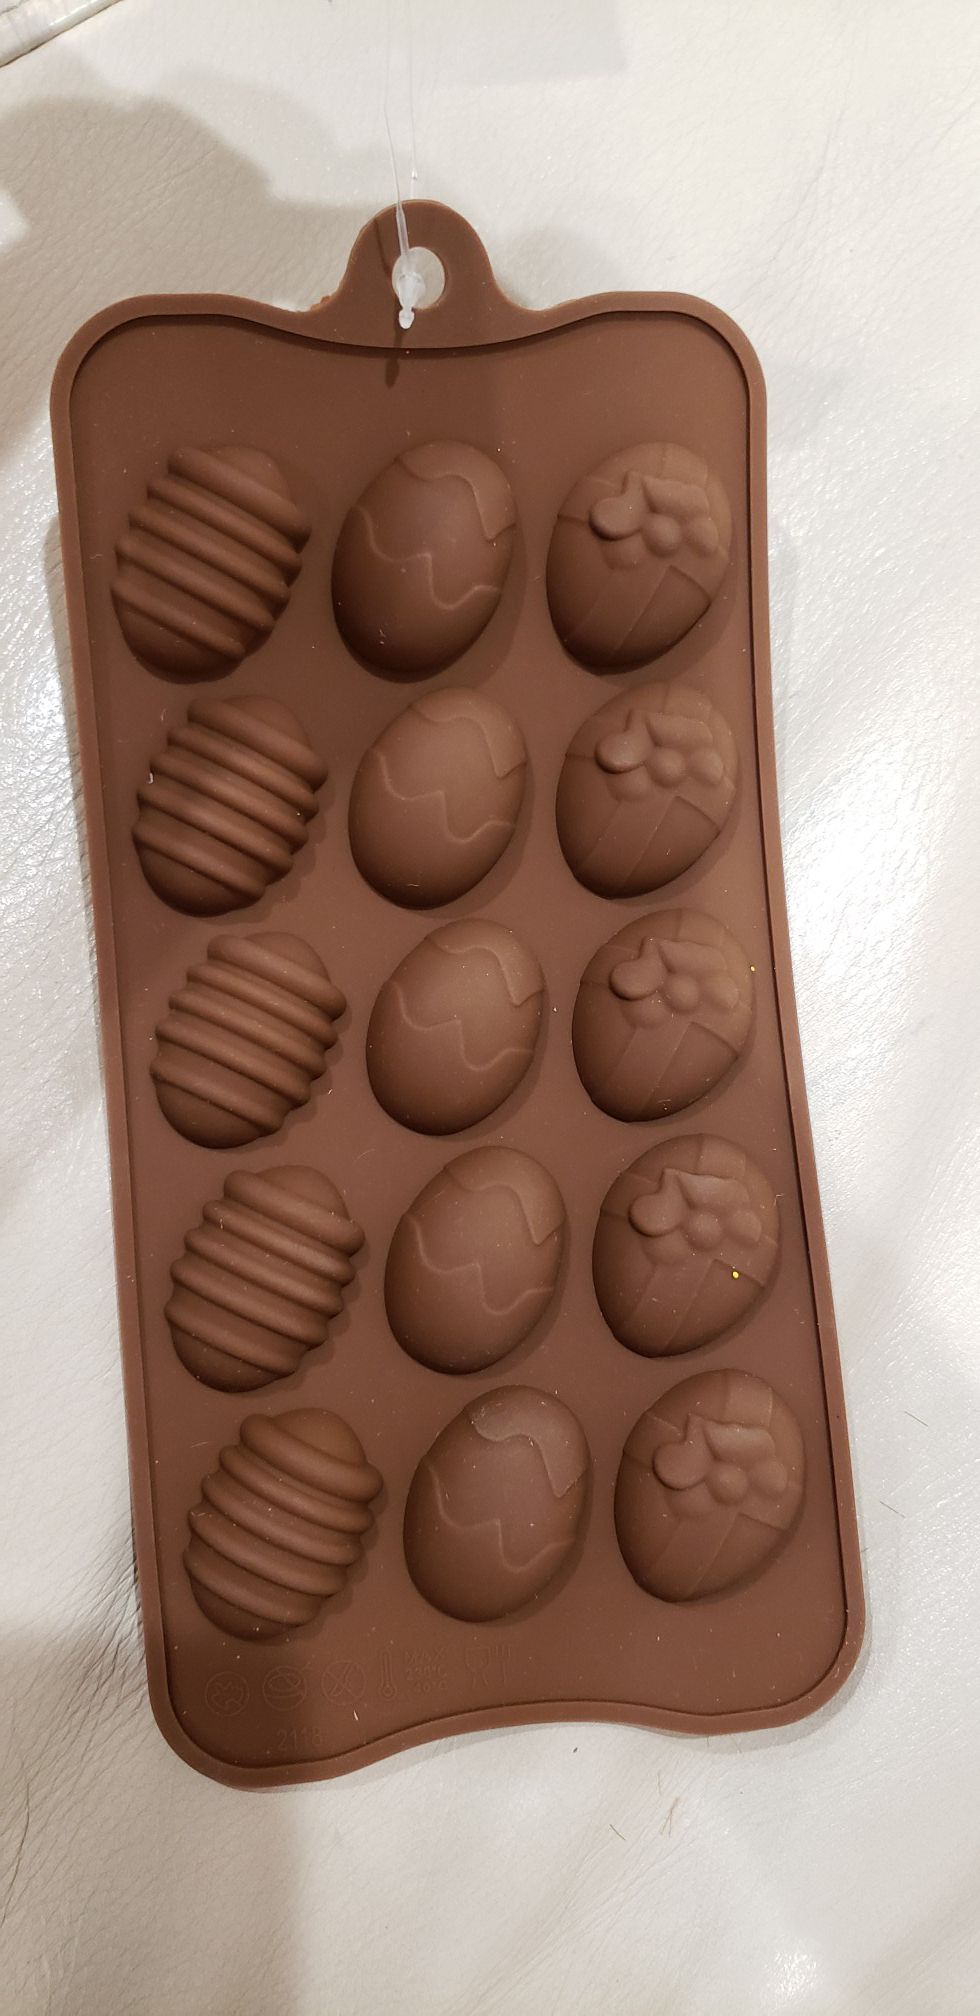 Easter eggs ice cube chocolate mold NEW Makes 15 egg shaped sweets, jello or ice cubes. Easy to get out / made of silicone